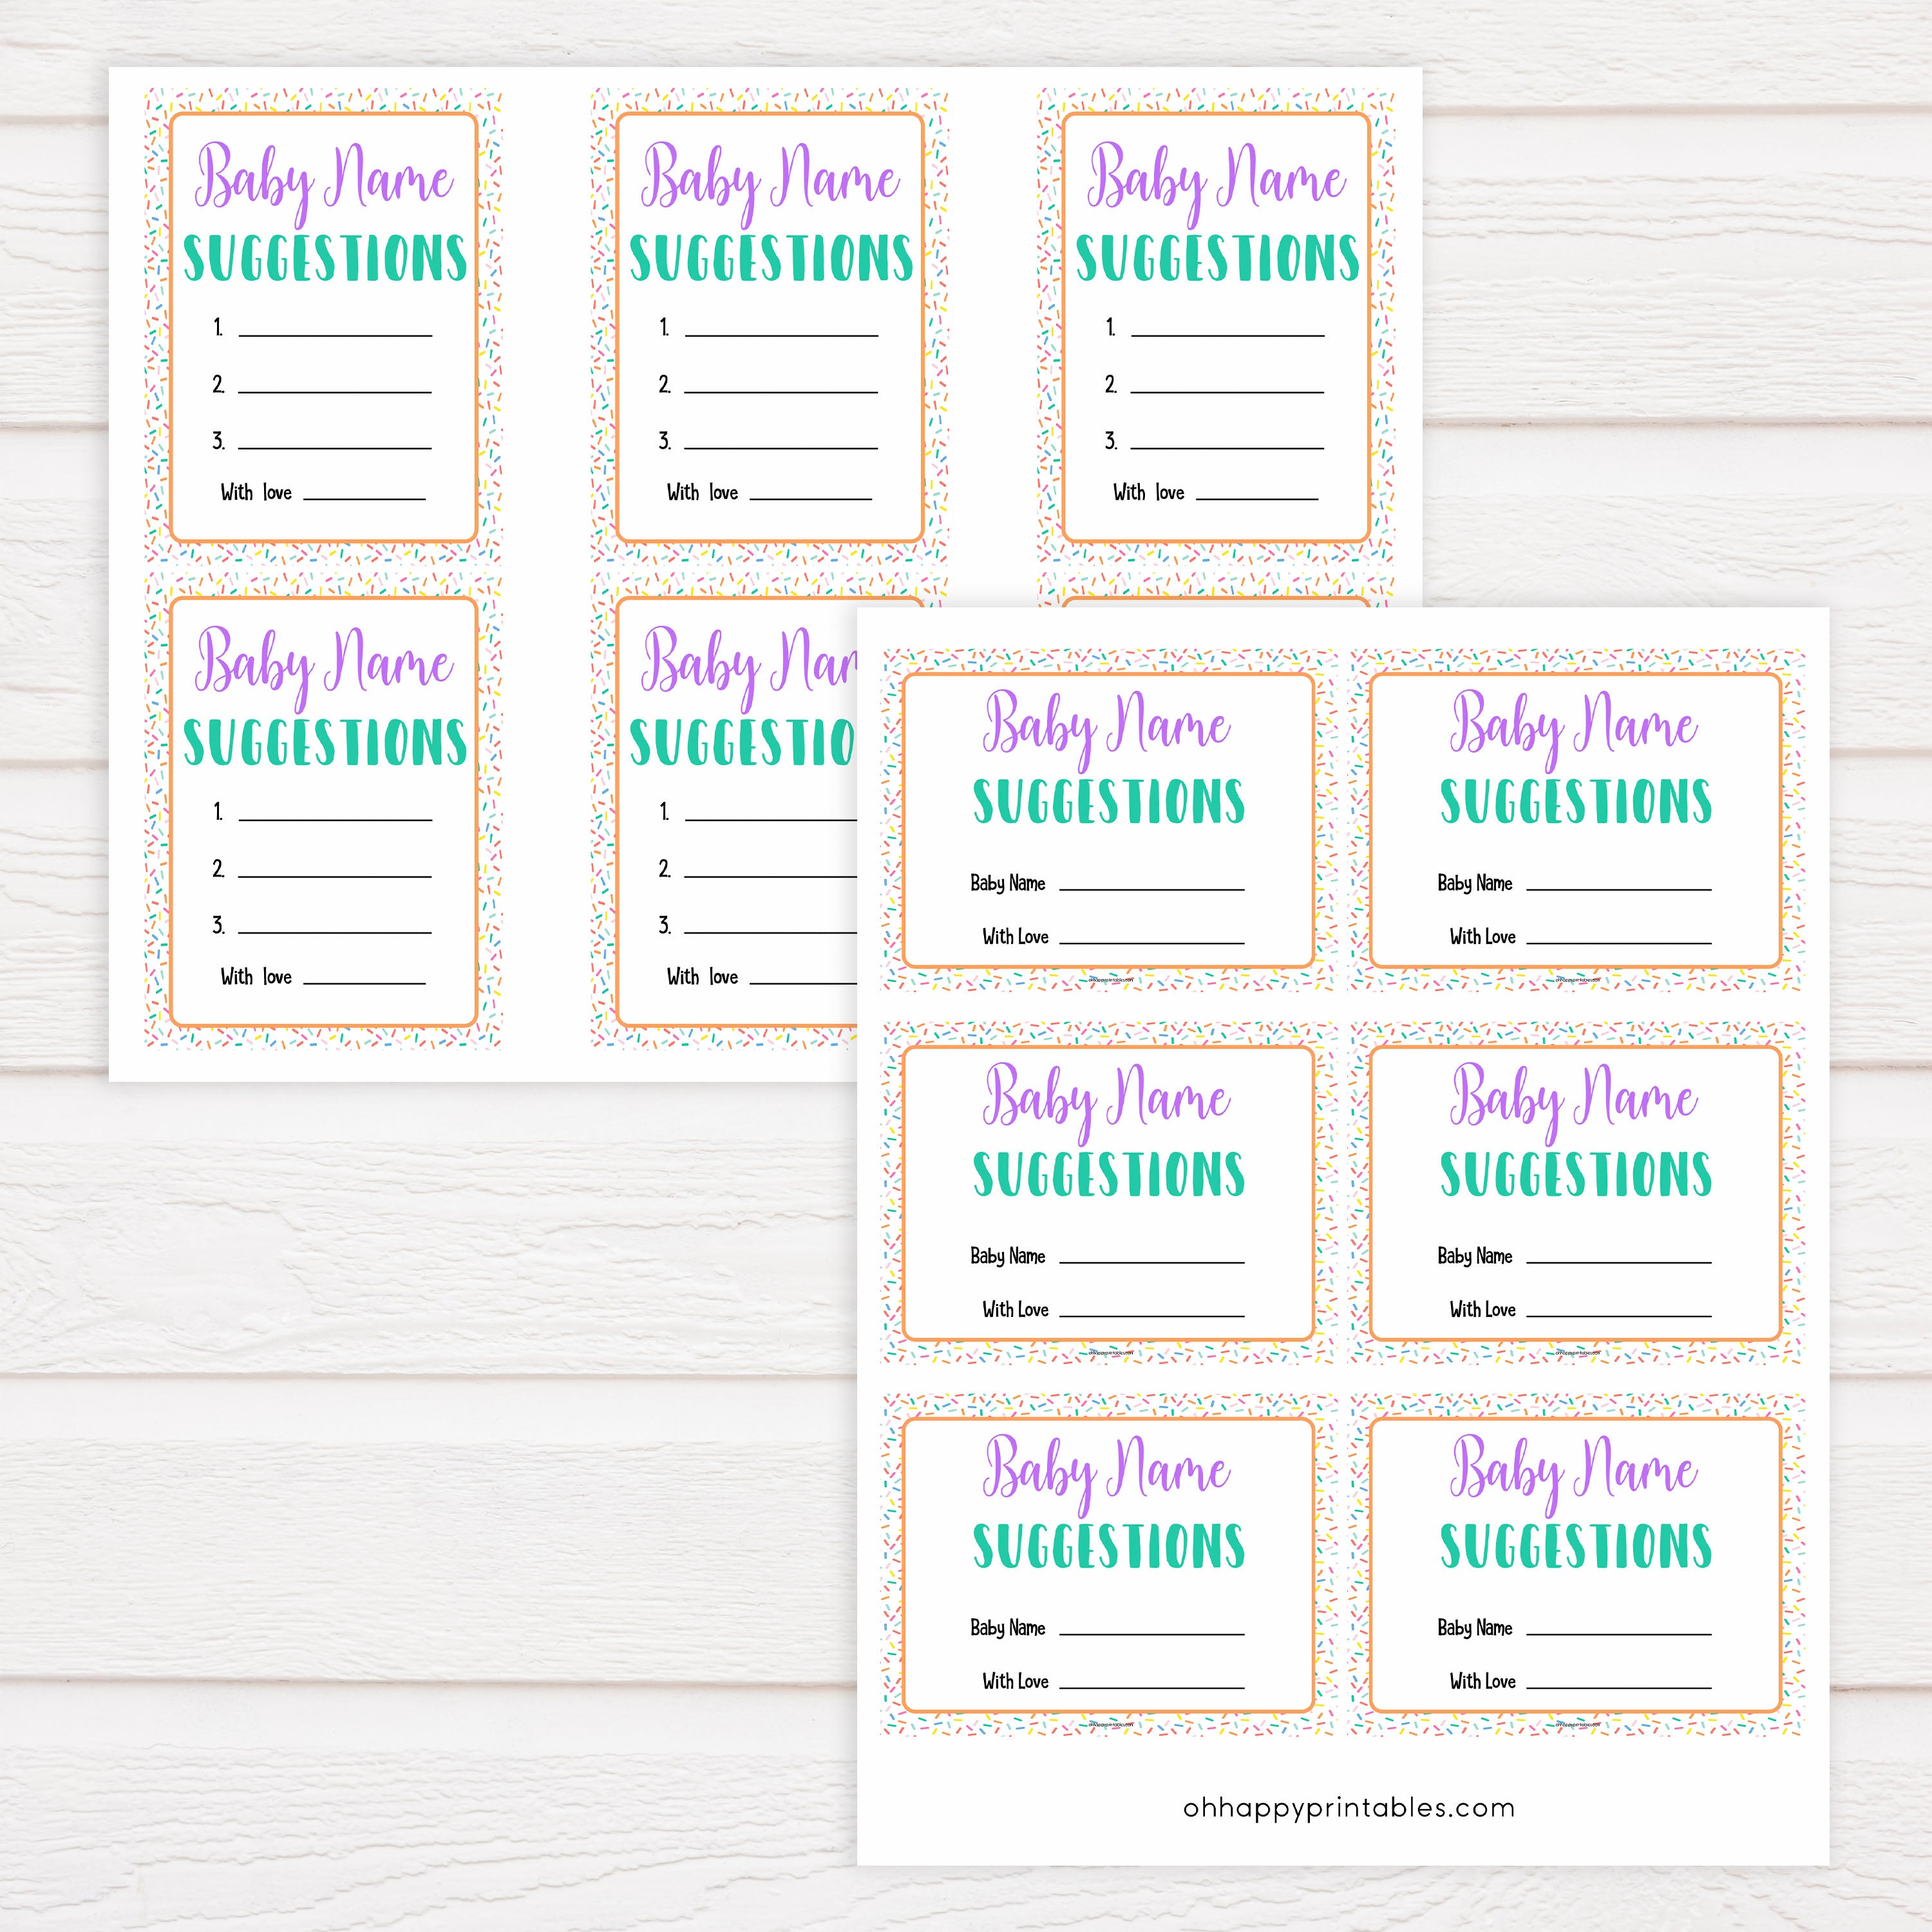 baby name suggestions, Printable baby shower games, baby sprinkle fun baby games, baby shower games, fun baby shower ideas, top baby shower ideas, sprinkle shower baby shower, friends baby shower ideas